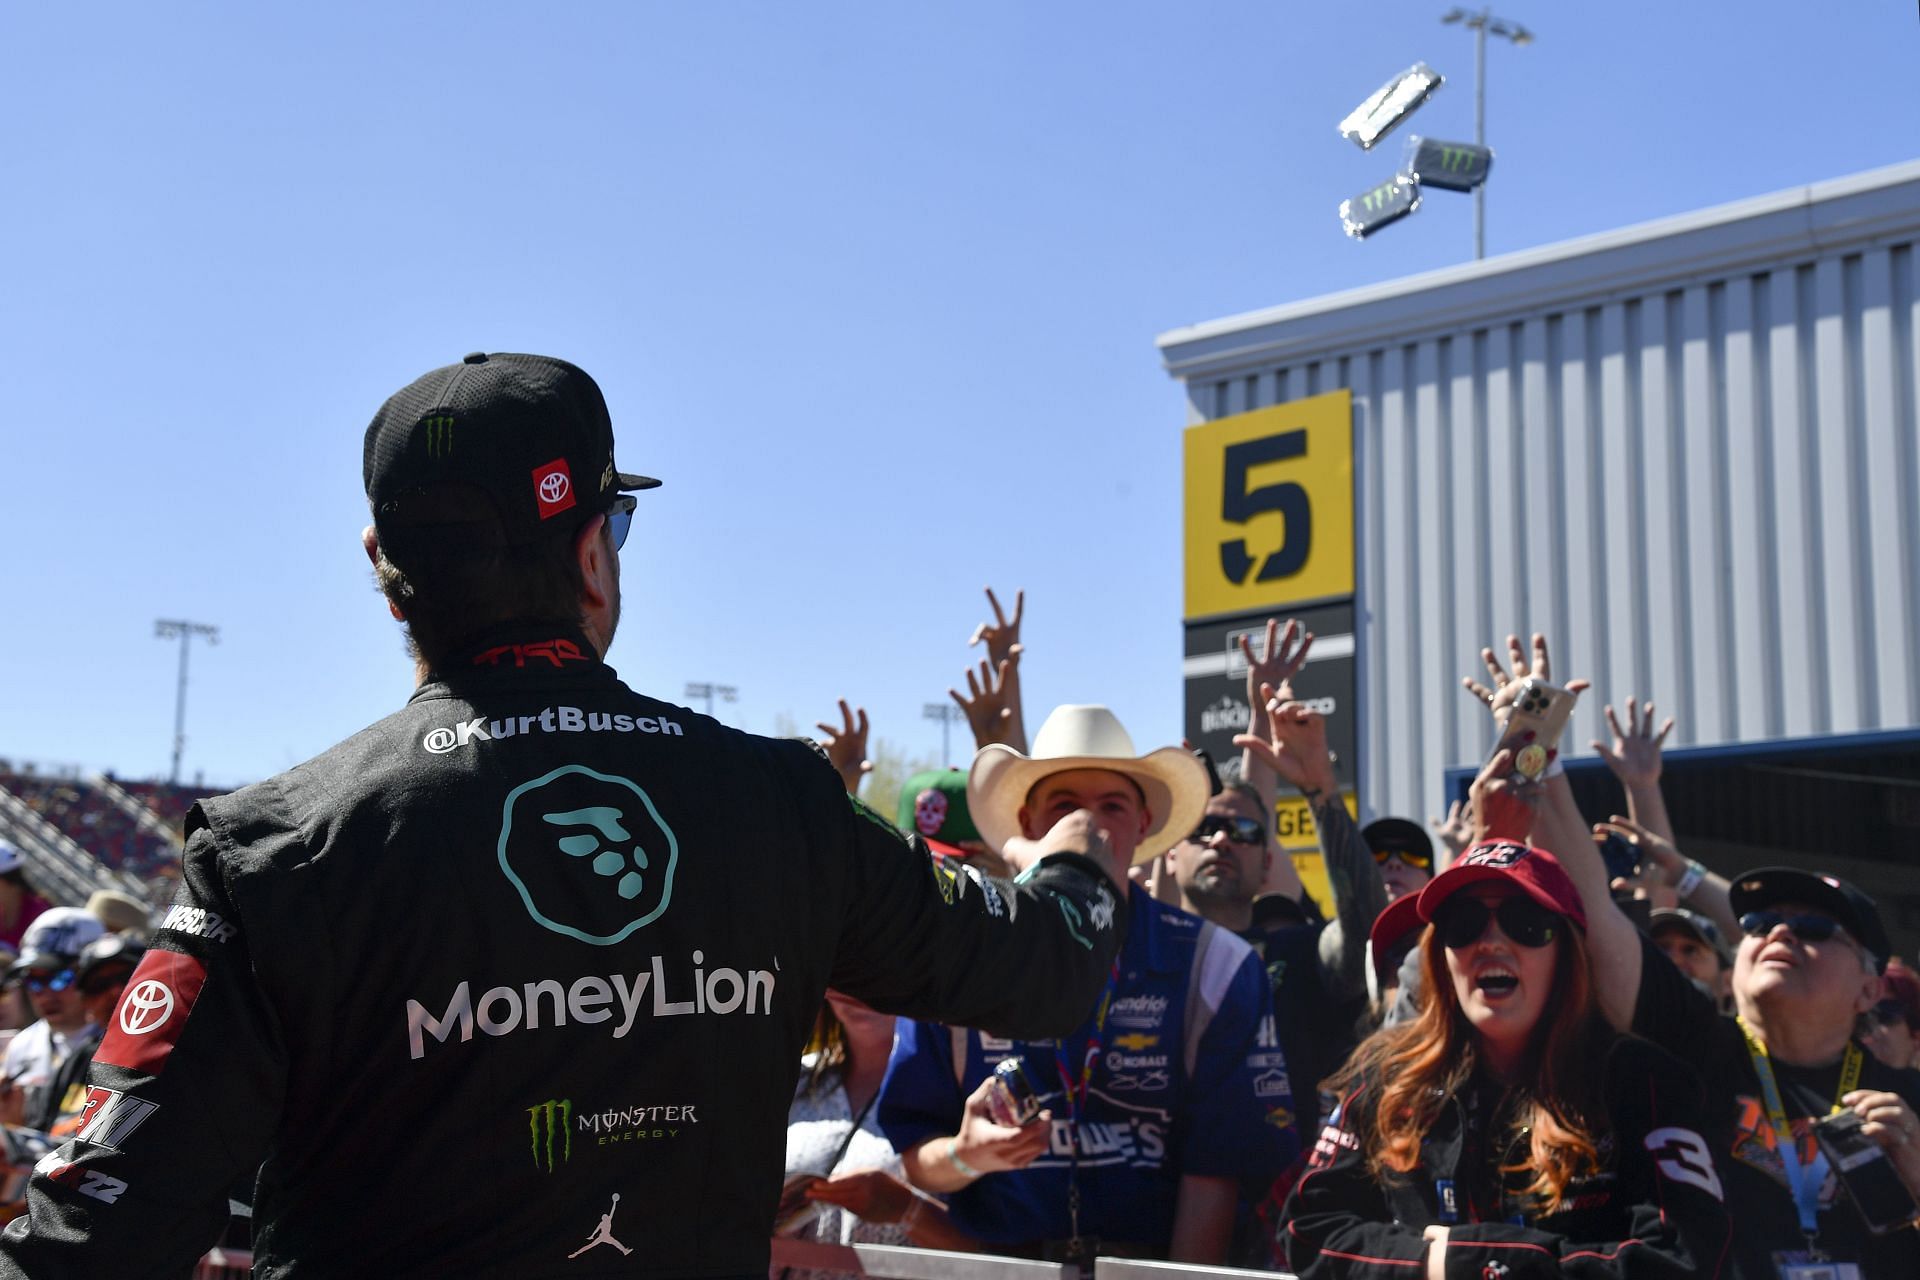 Kurt Busch engaging with his fans prior to the Ruoff Mortgage 500. (Photo by Logan Riely/Getty Images)